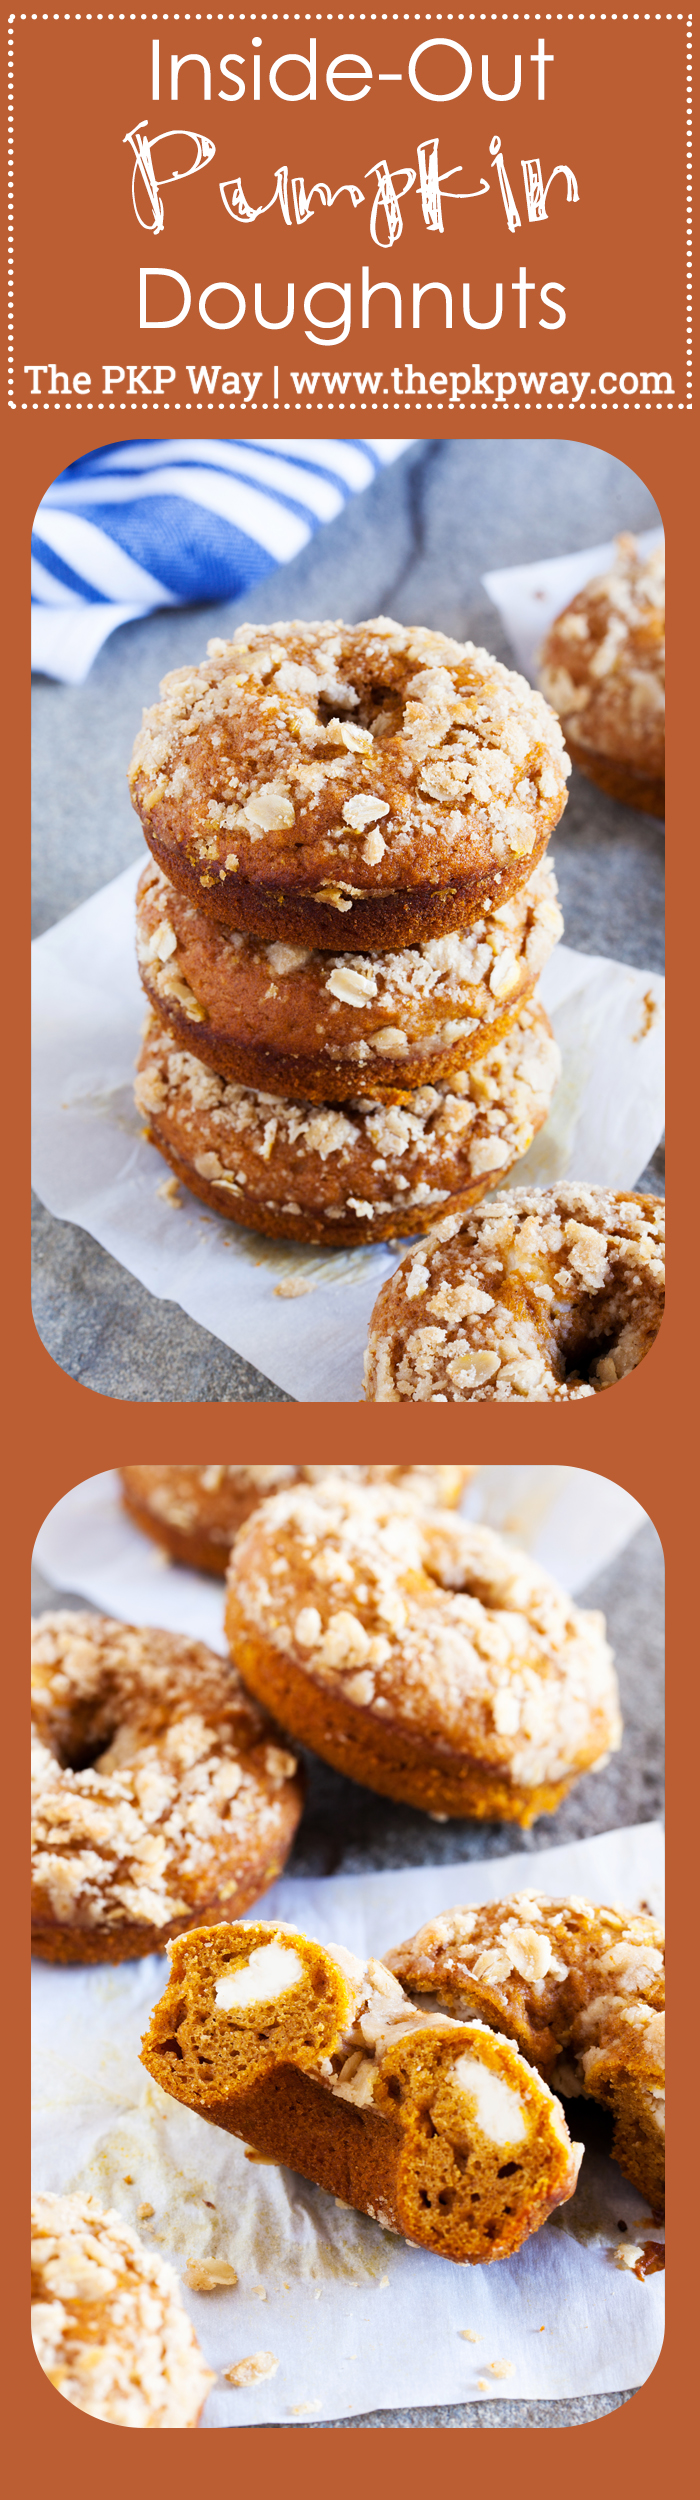 The perfect recipe to kick-off pumpkin season and fall, these Inside-Out Pumpkin Doughnuts feature a sweet and tangy cream cheese frosting stuffed inside a pumpkin spice muffin and topped with a crunchy streusel topping!